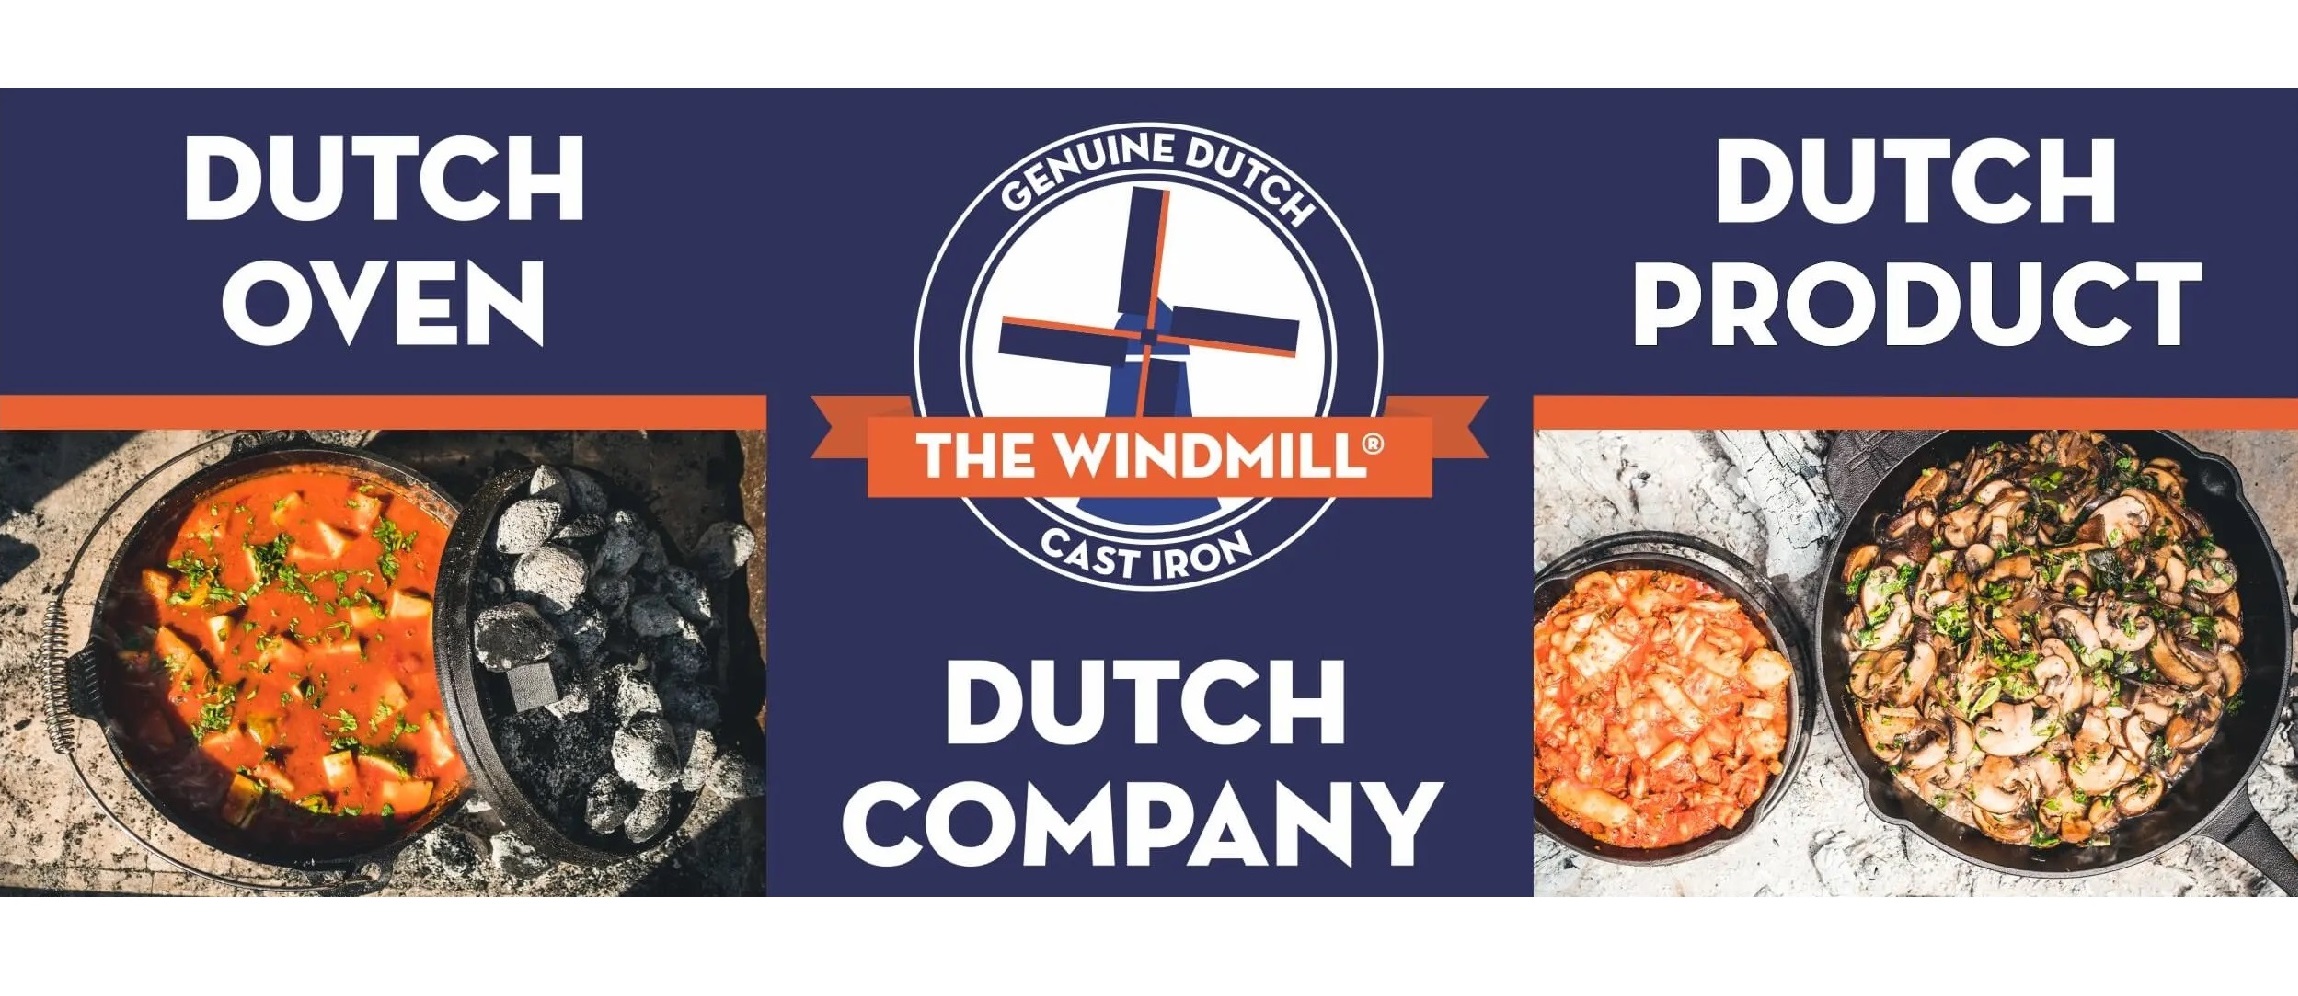 The-Windmill-webp-HOMEPAGE-BANNER-2500x880